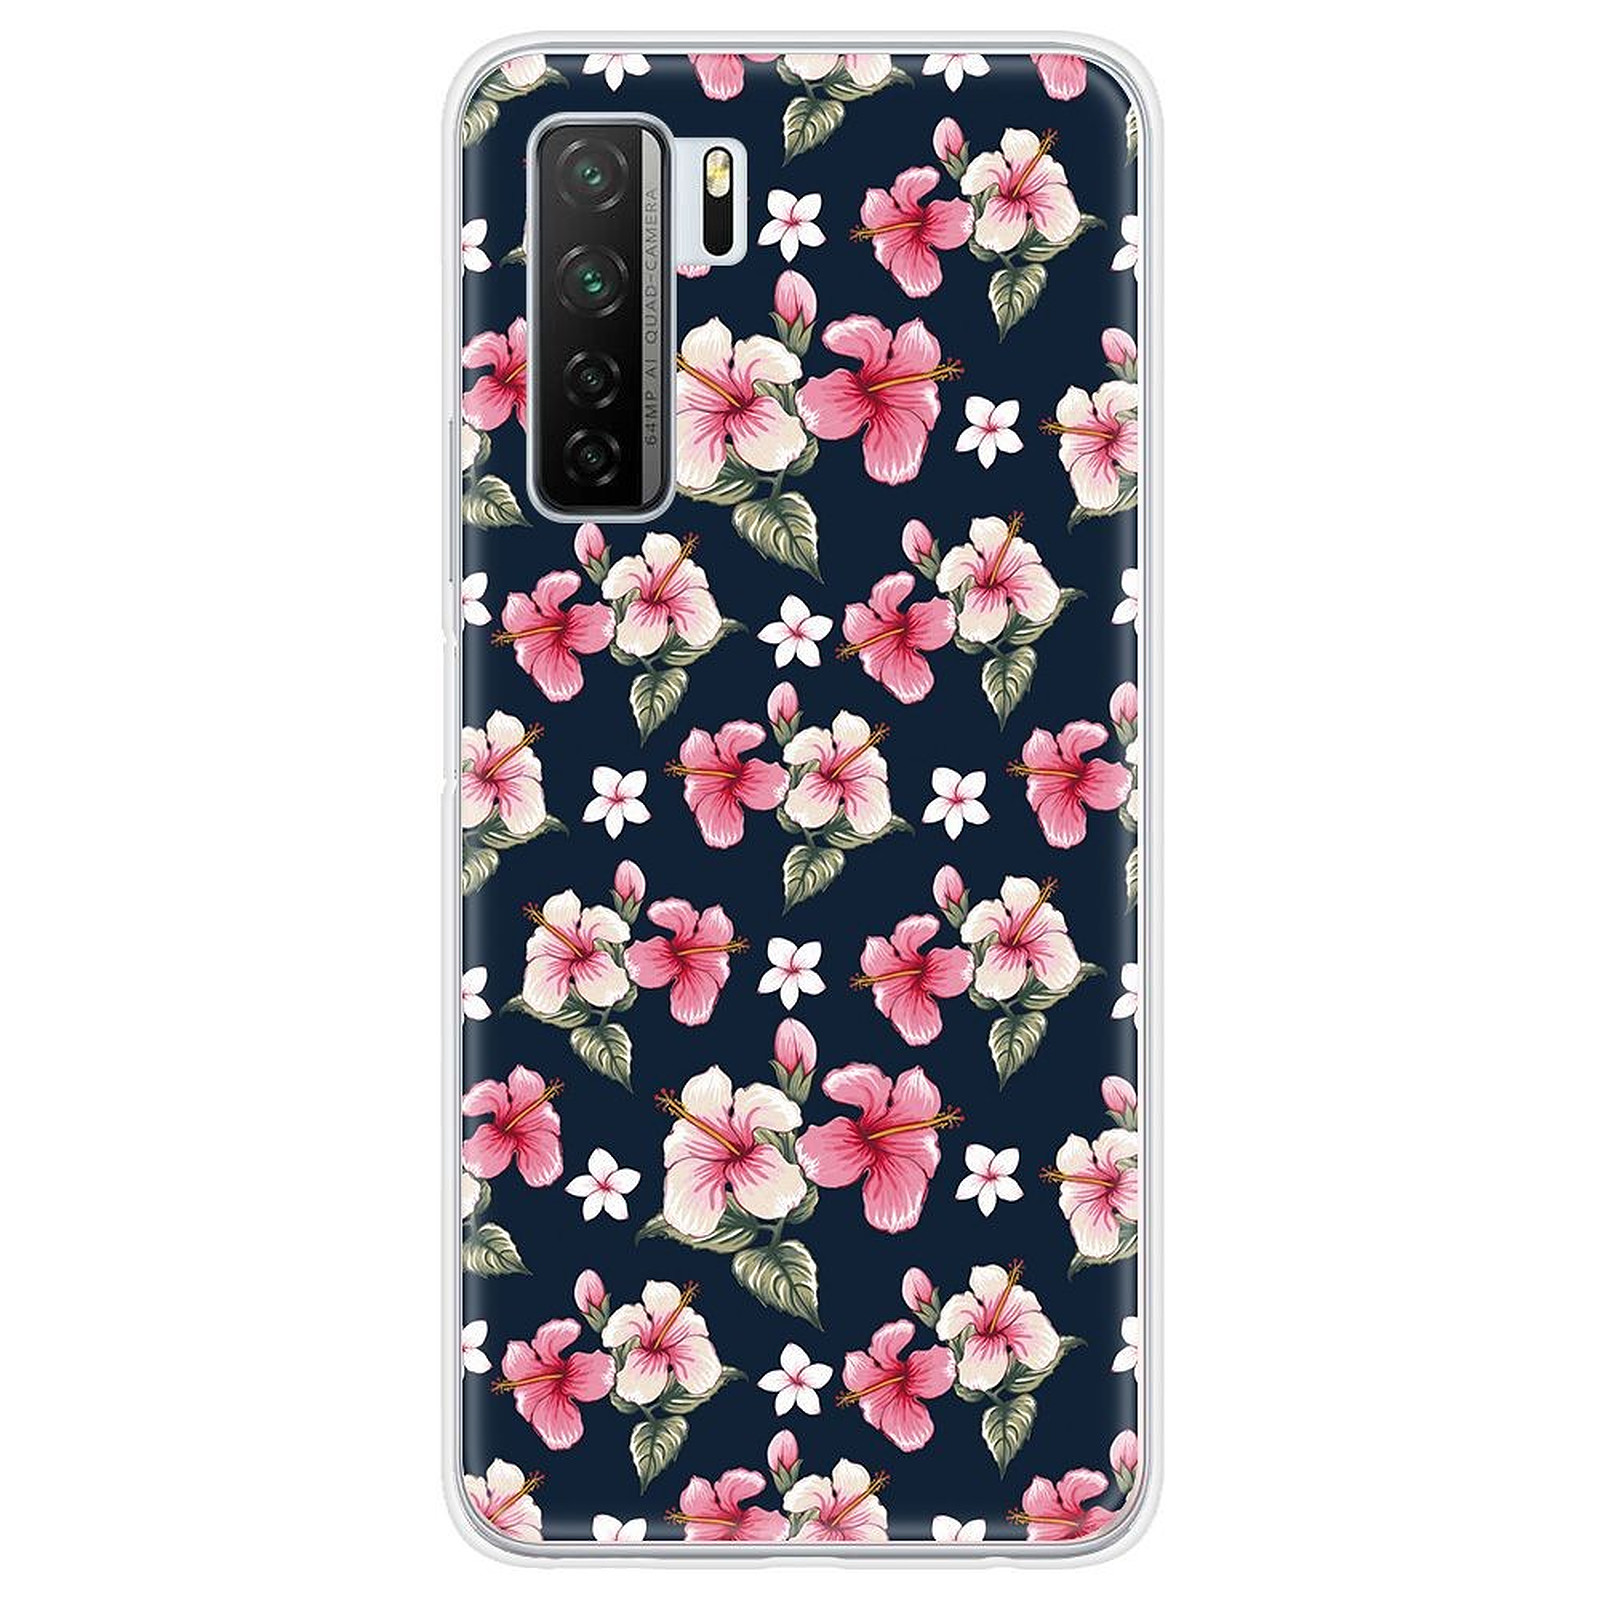 1001 Coques Coque silicone gel Huawei P40 Lite 5G motif Hibiscus Vintage - Coque telephone 1001Coques